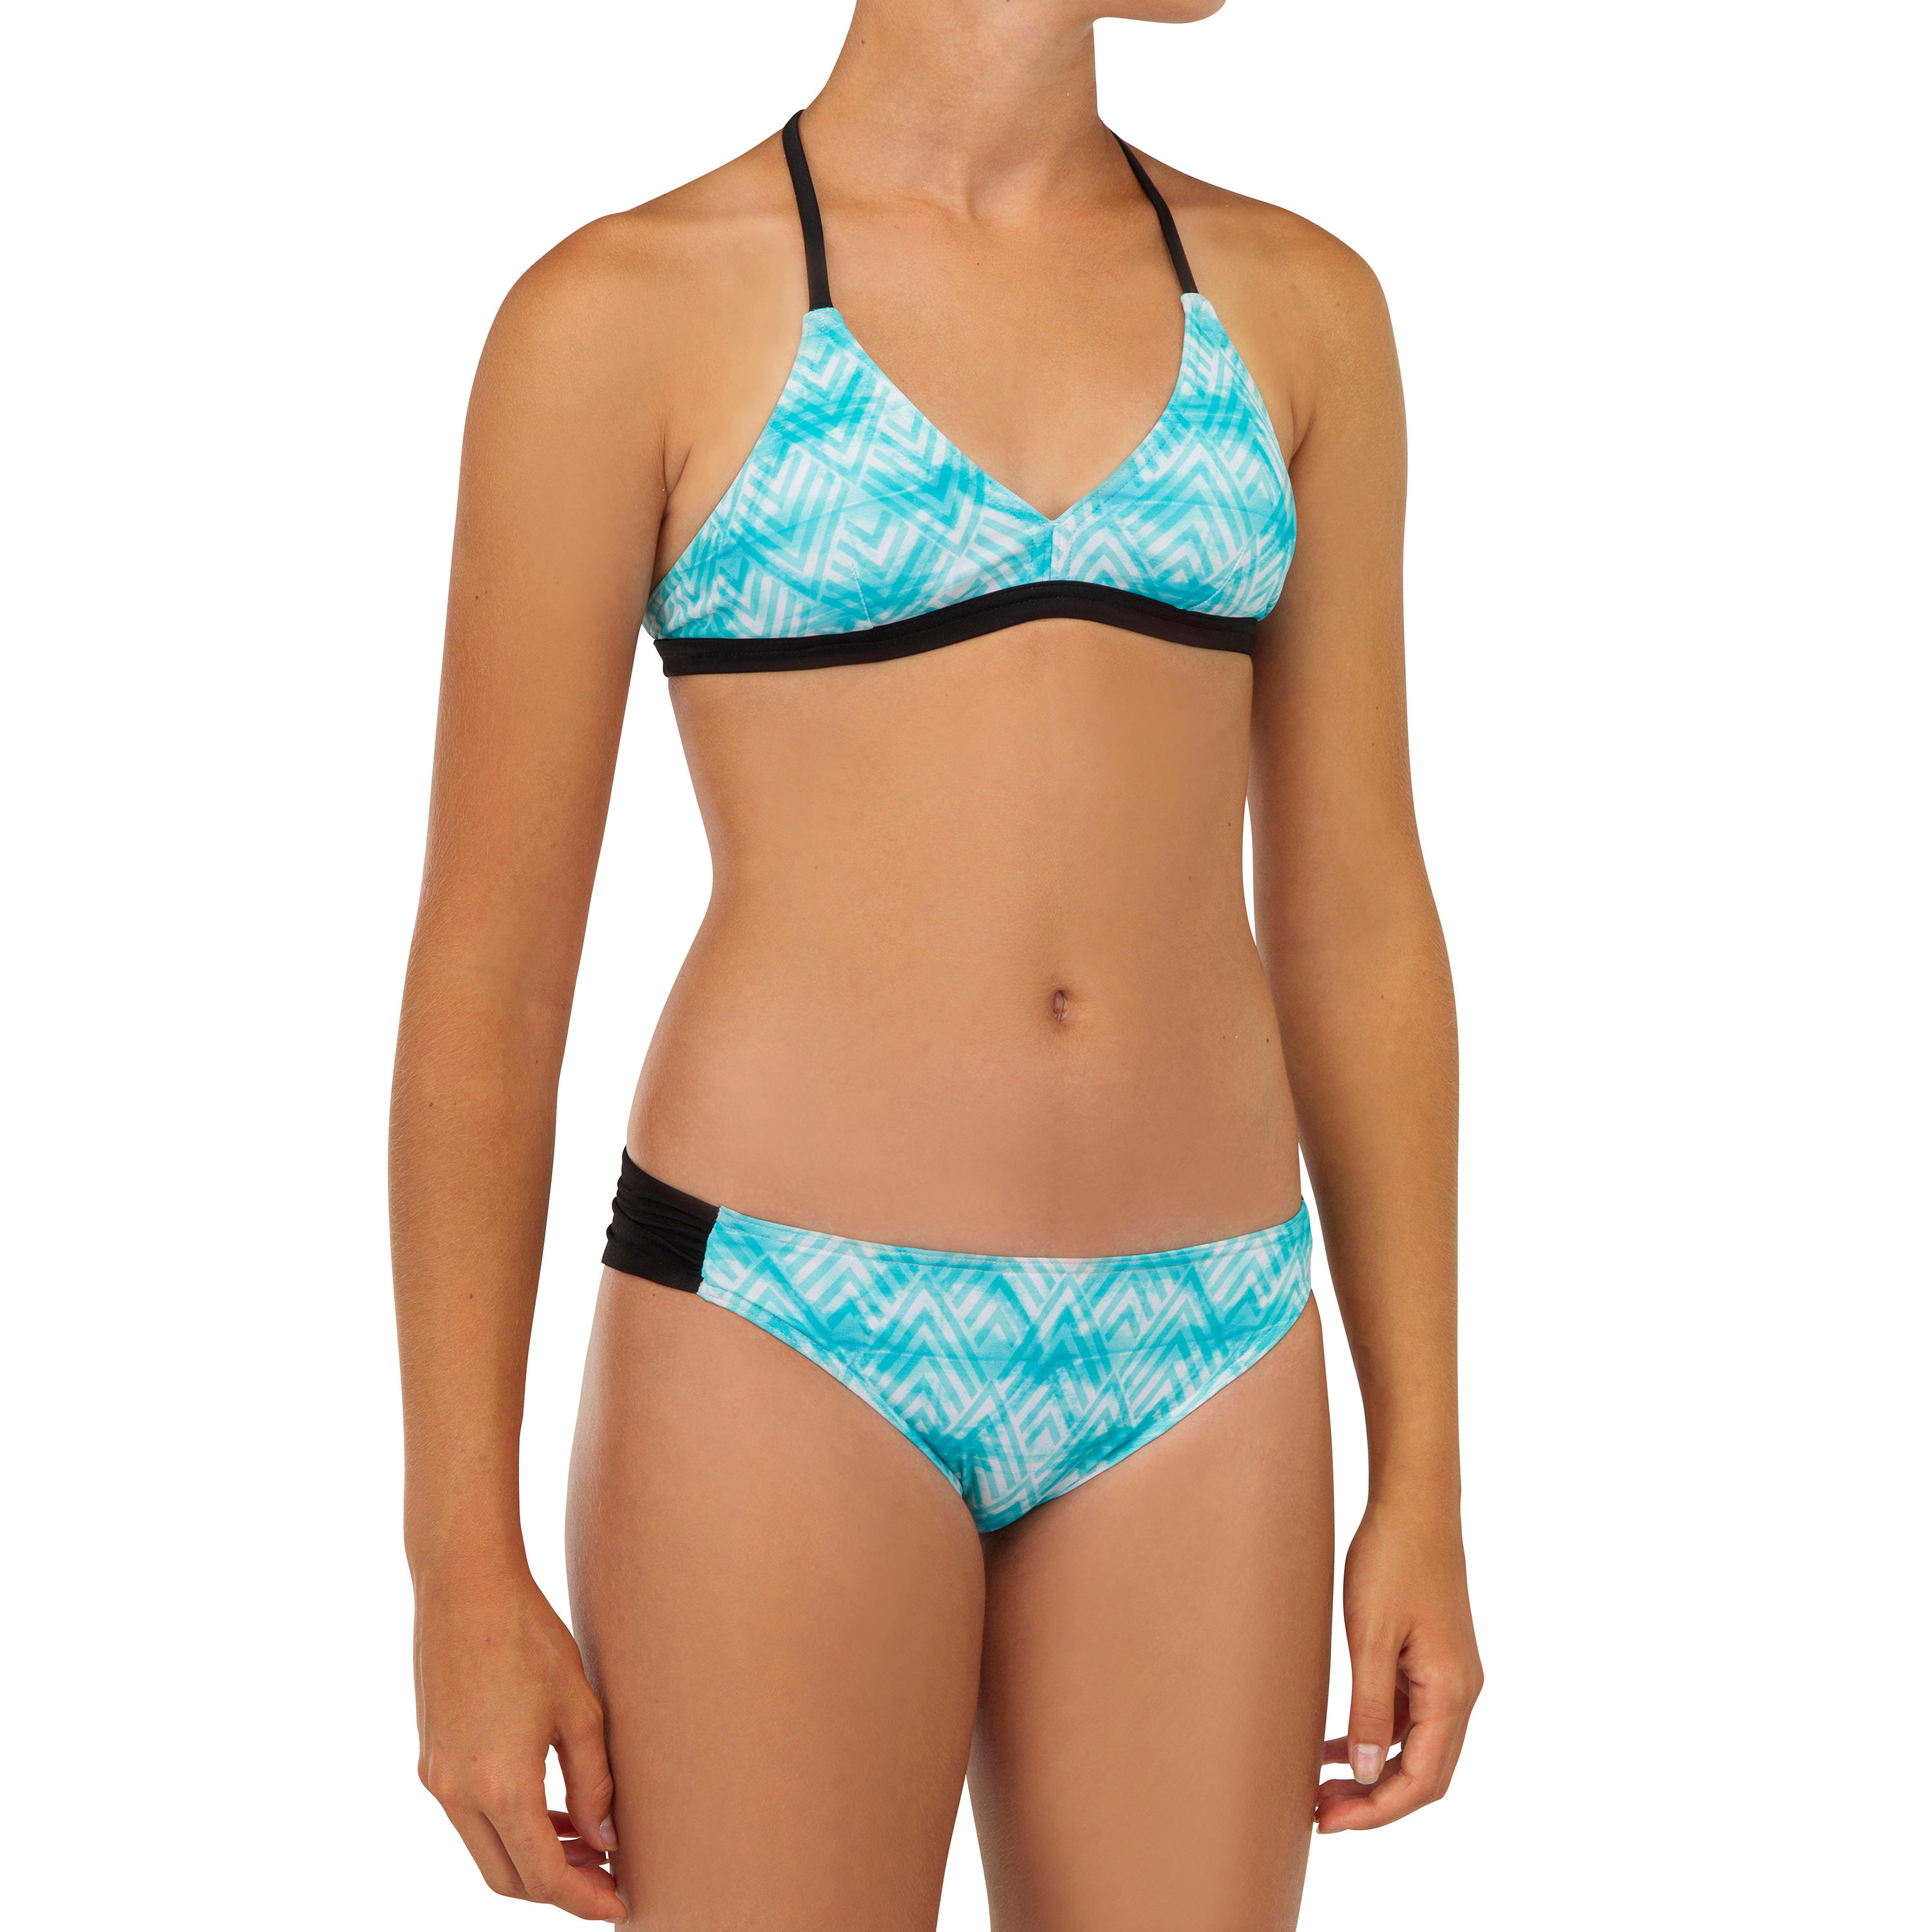 BETTY 500 SURF GIRL'S SWIMSUIT TOP AND TRIANGLE TURQUOISE 4/7